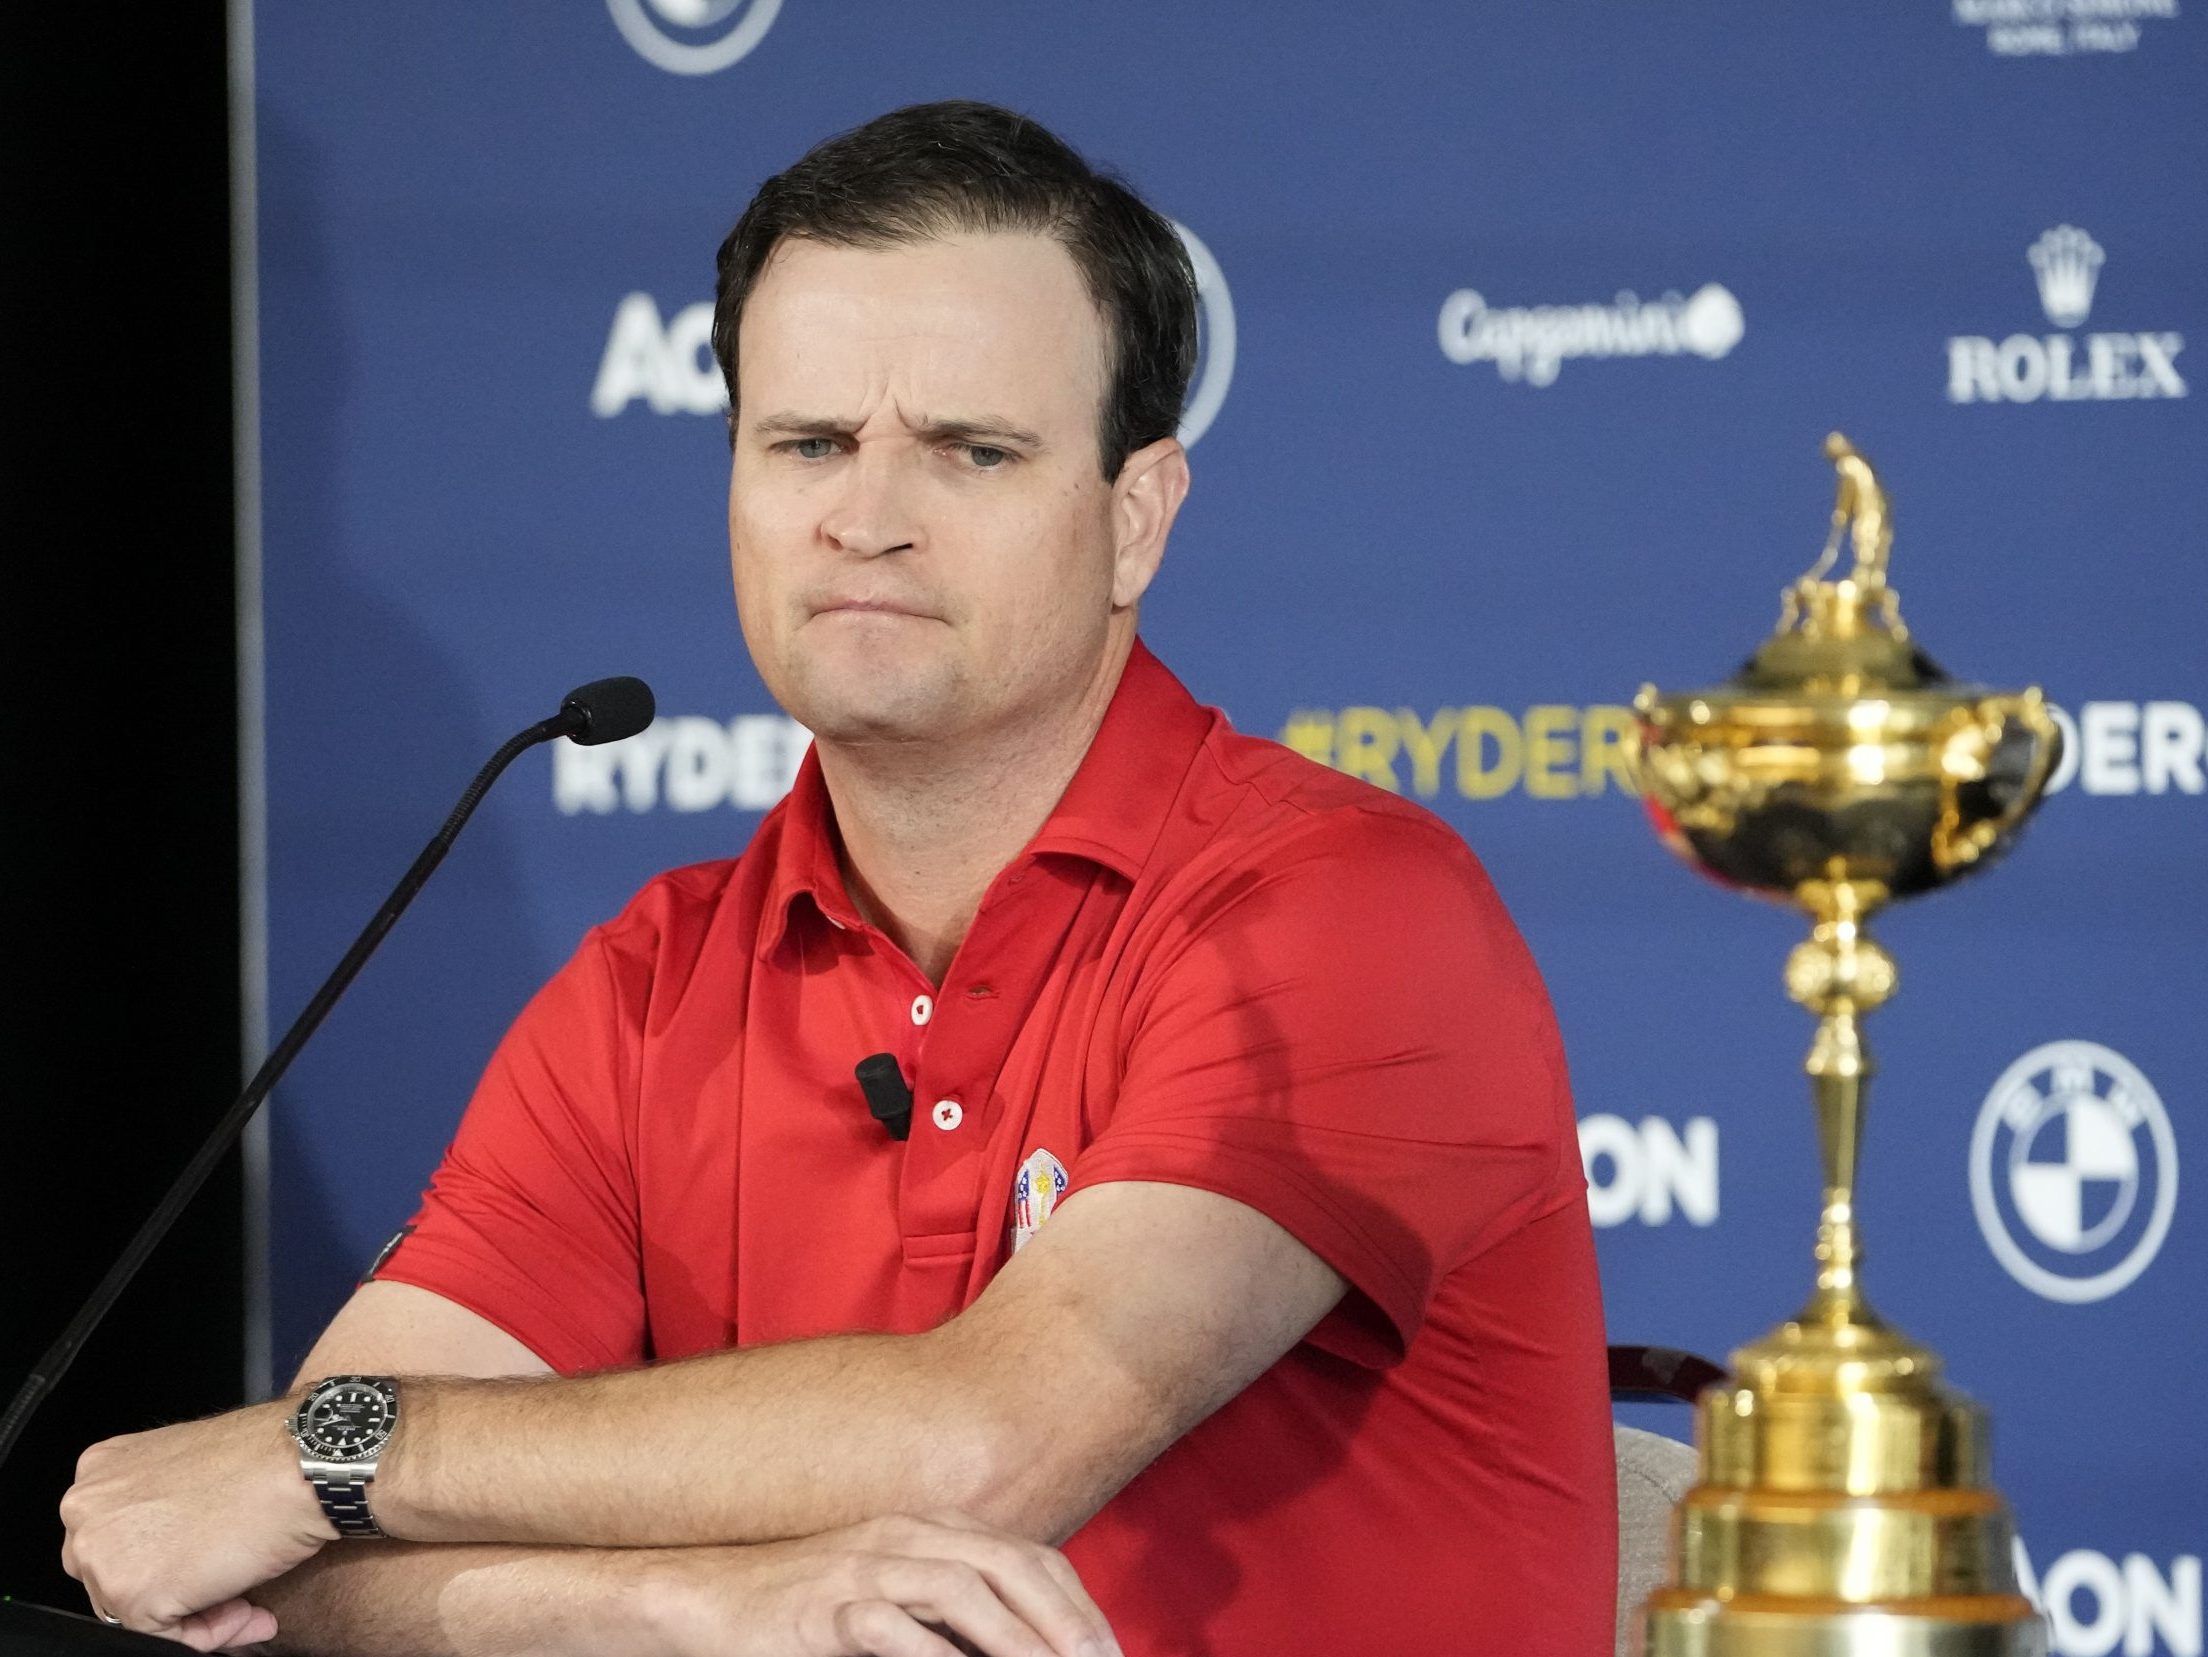 2023 Ryder Cup odds Can Americans finally end road woes? Chatham